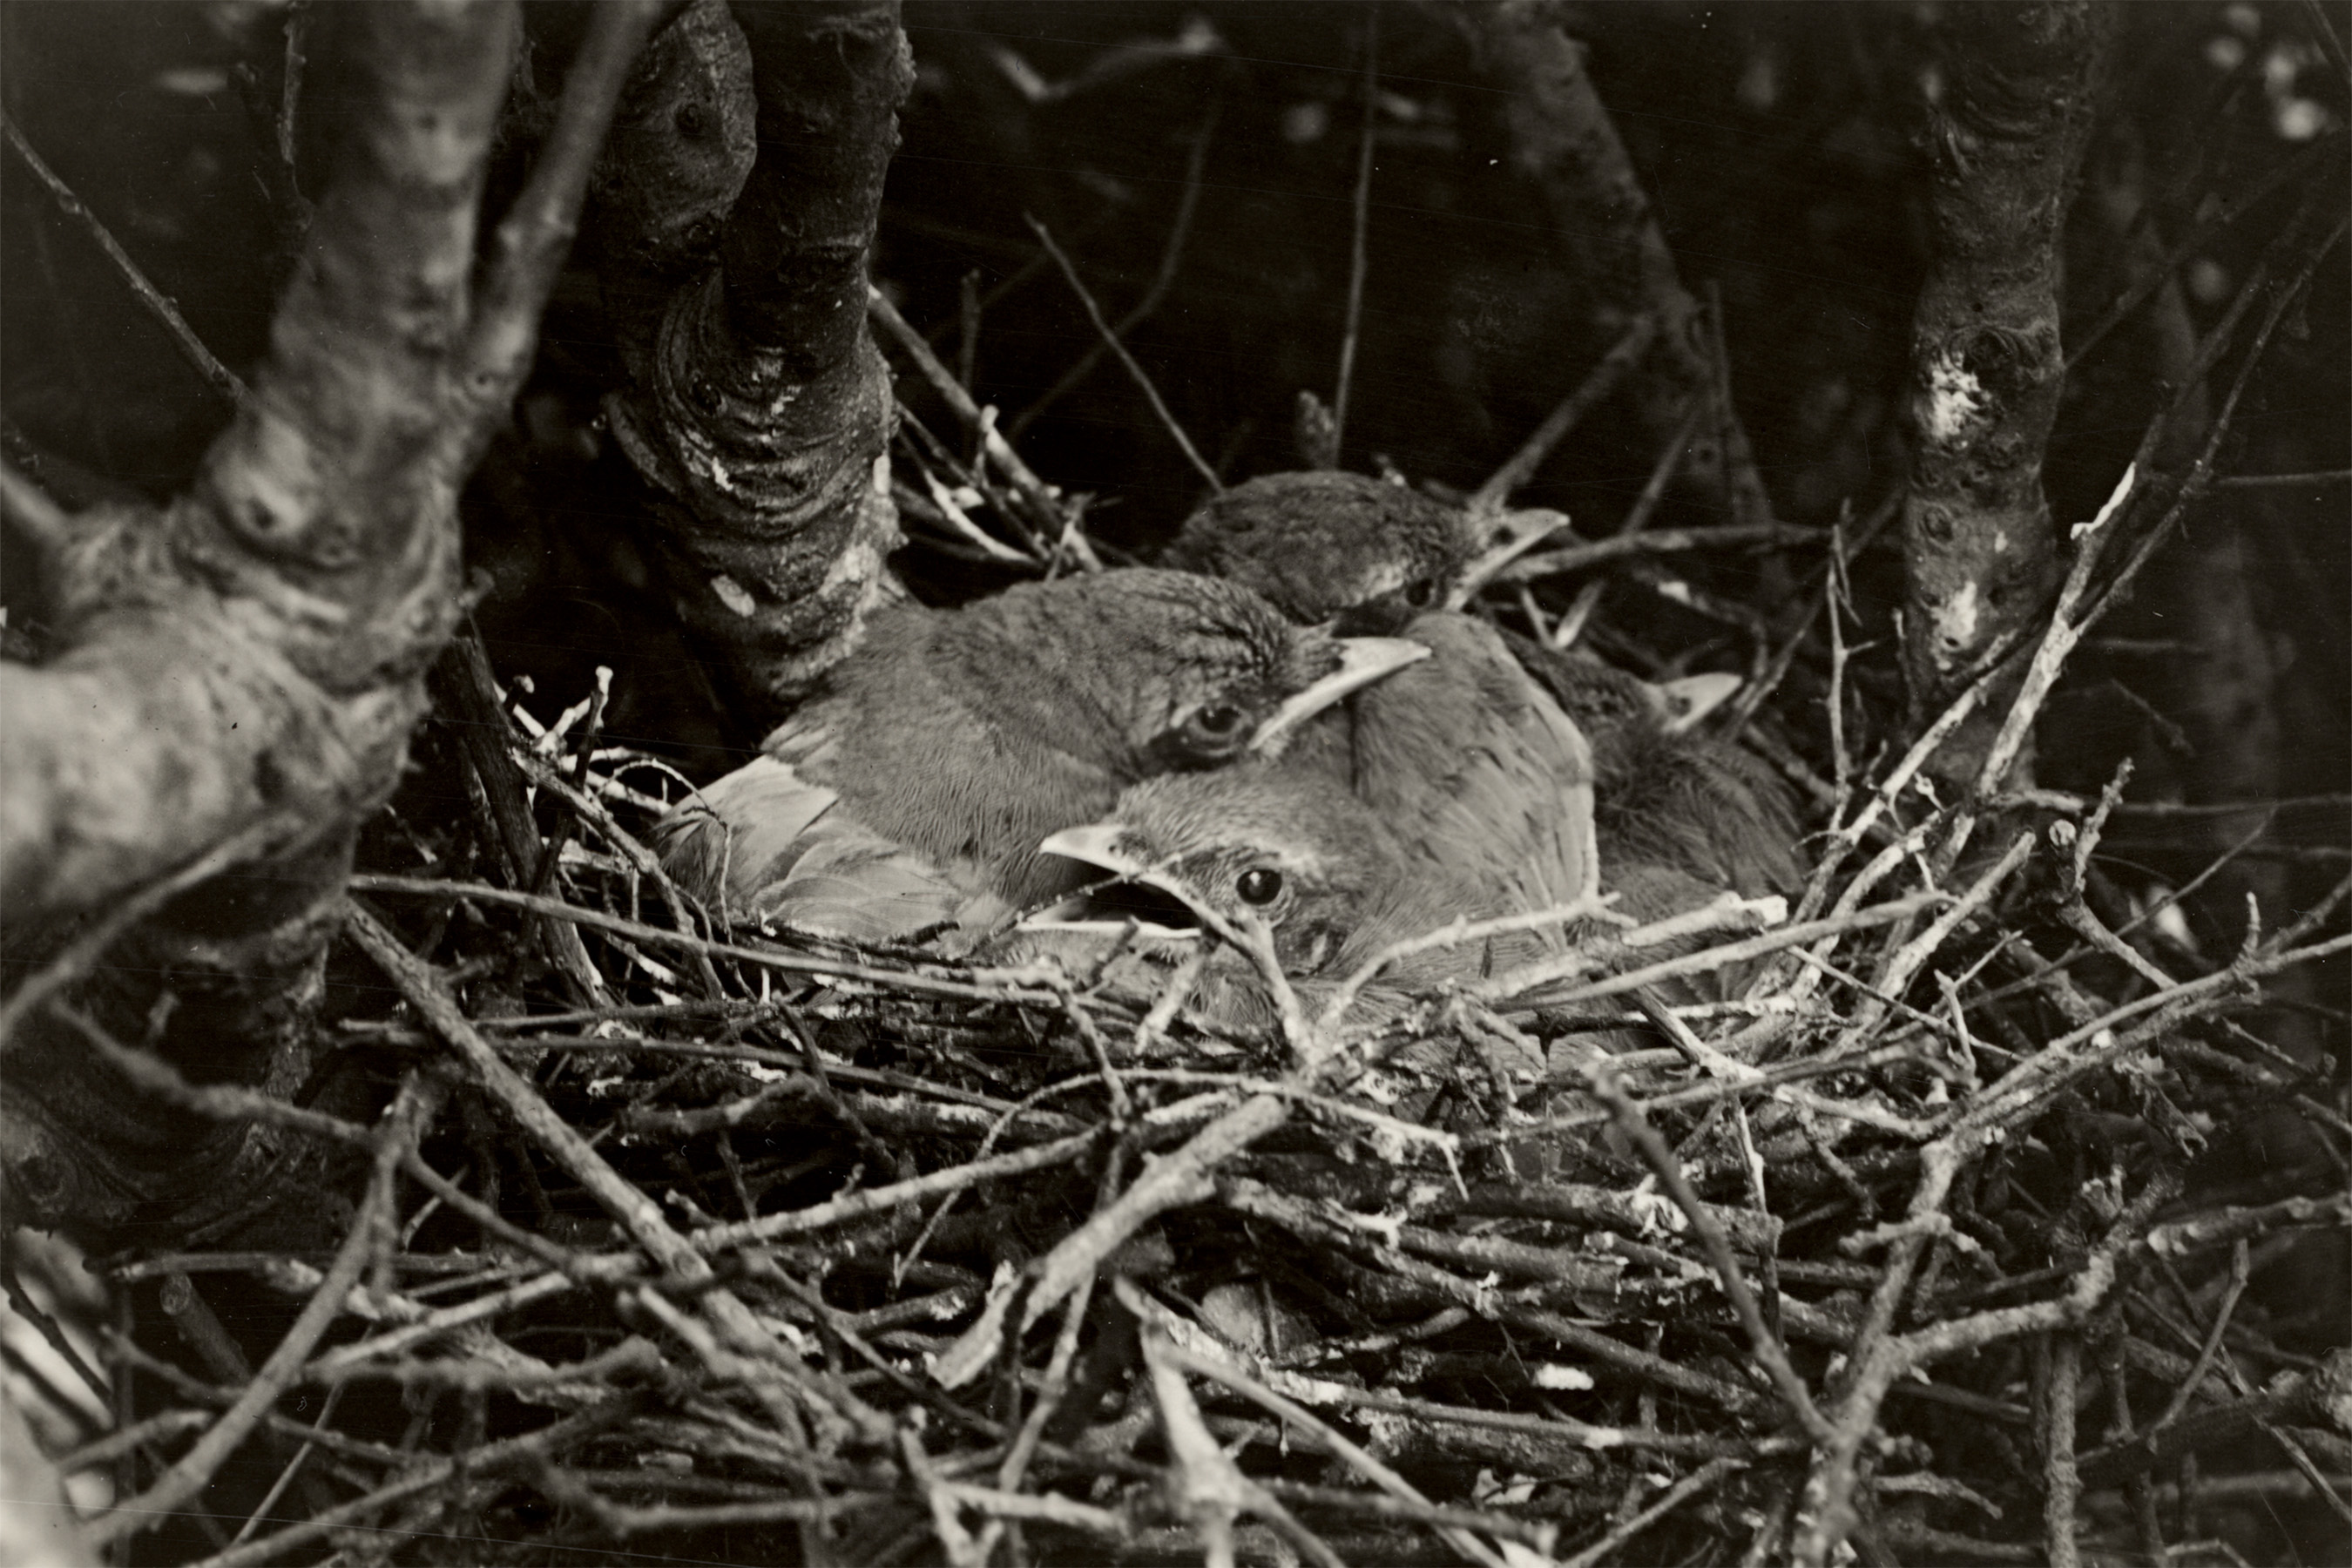 California Scrub-Jay nestlings on their nest in Berkeley, California, May 20, 1921. (With the Permission of the Museum of Vertebrate Zoology, University of California, Berkeley)